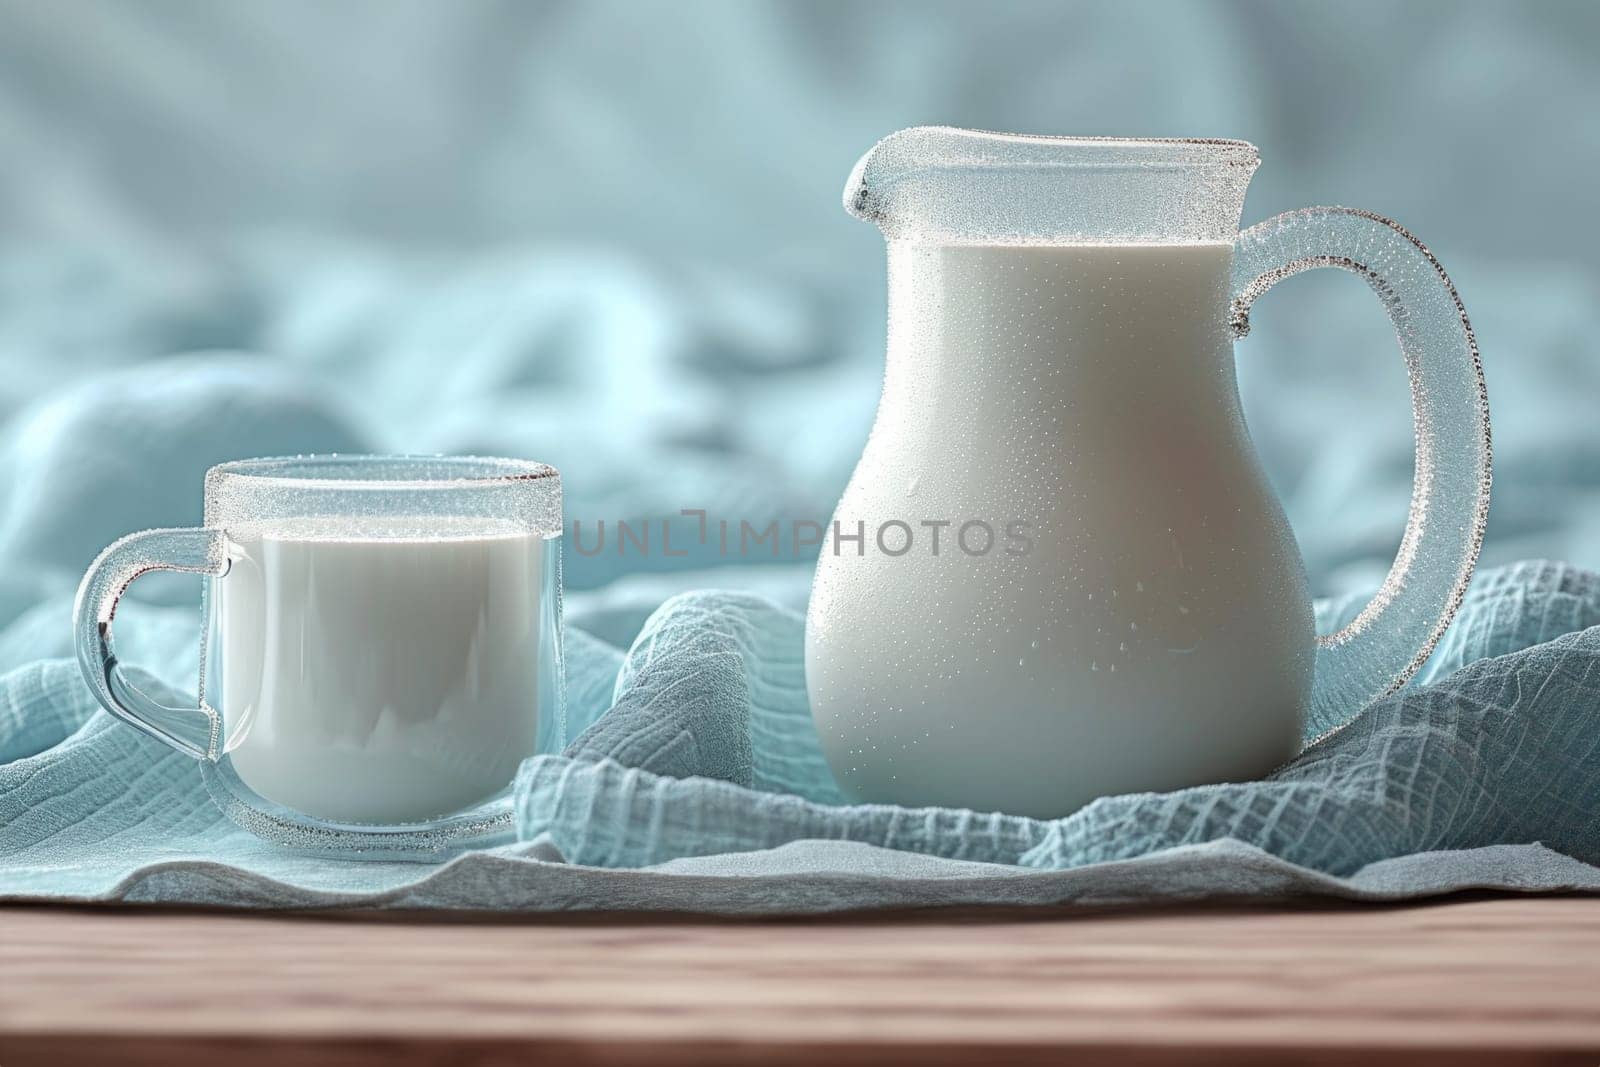 Aesthetic still life of a decanter and a mug of milk on a blue background.